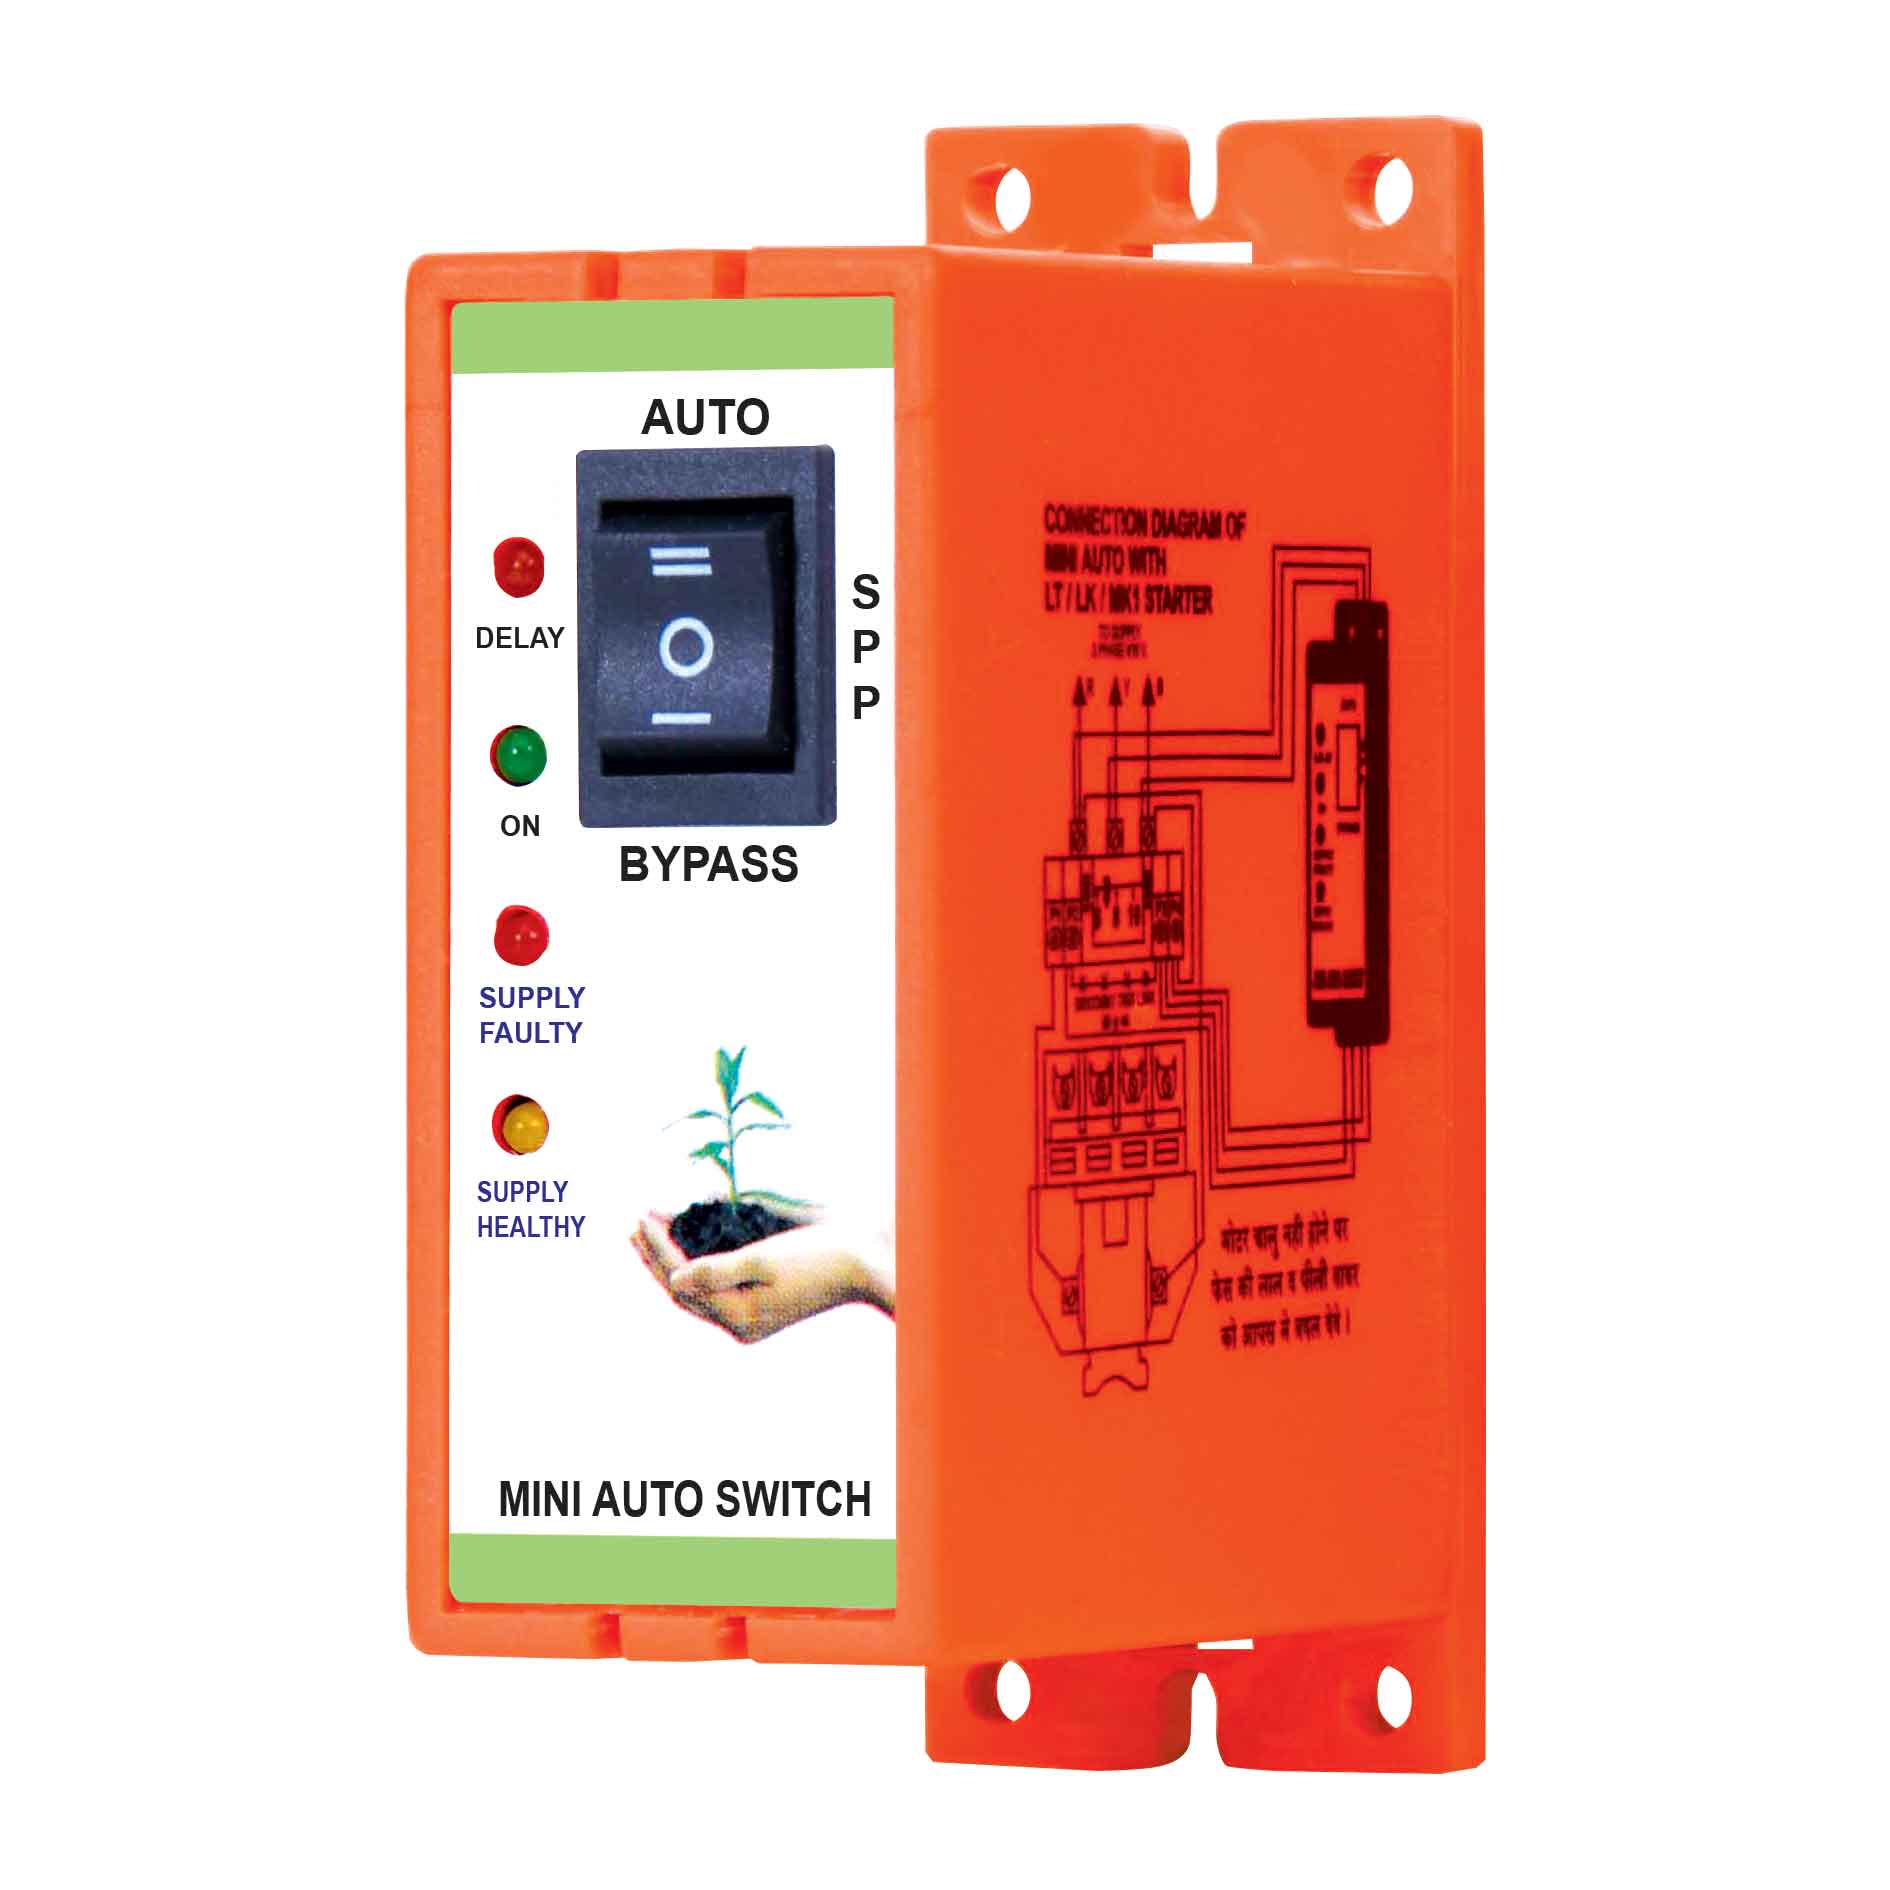 MINI Auto Switch for 3 Phase Motor with spp and on time delay auto start when fault resolved